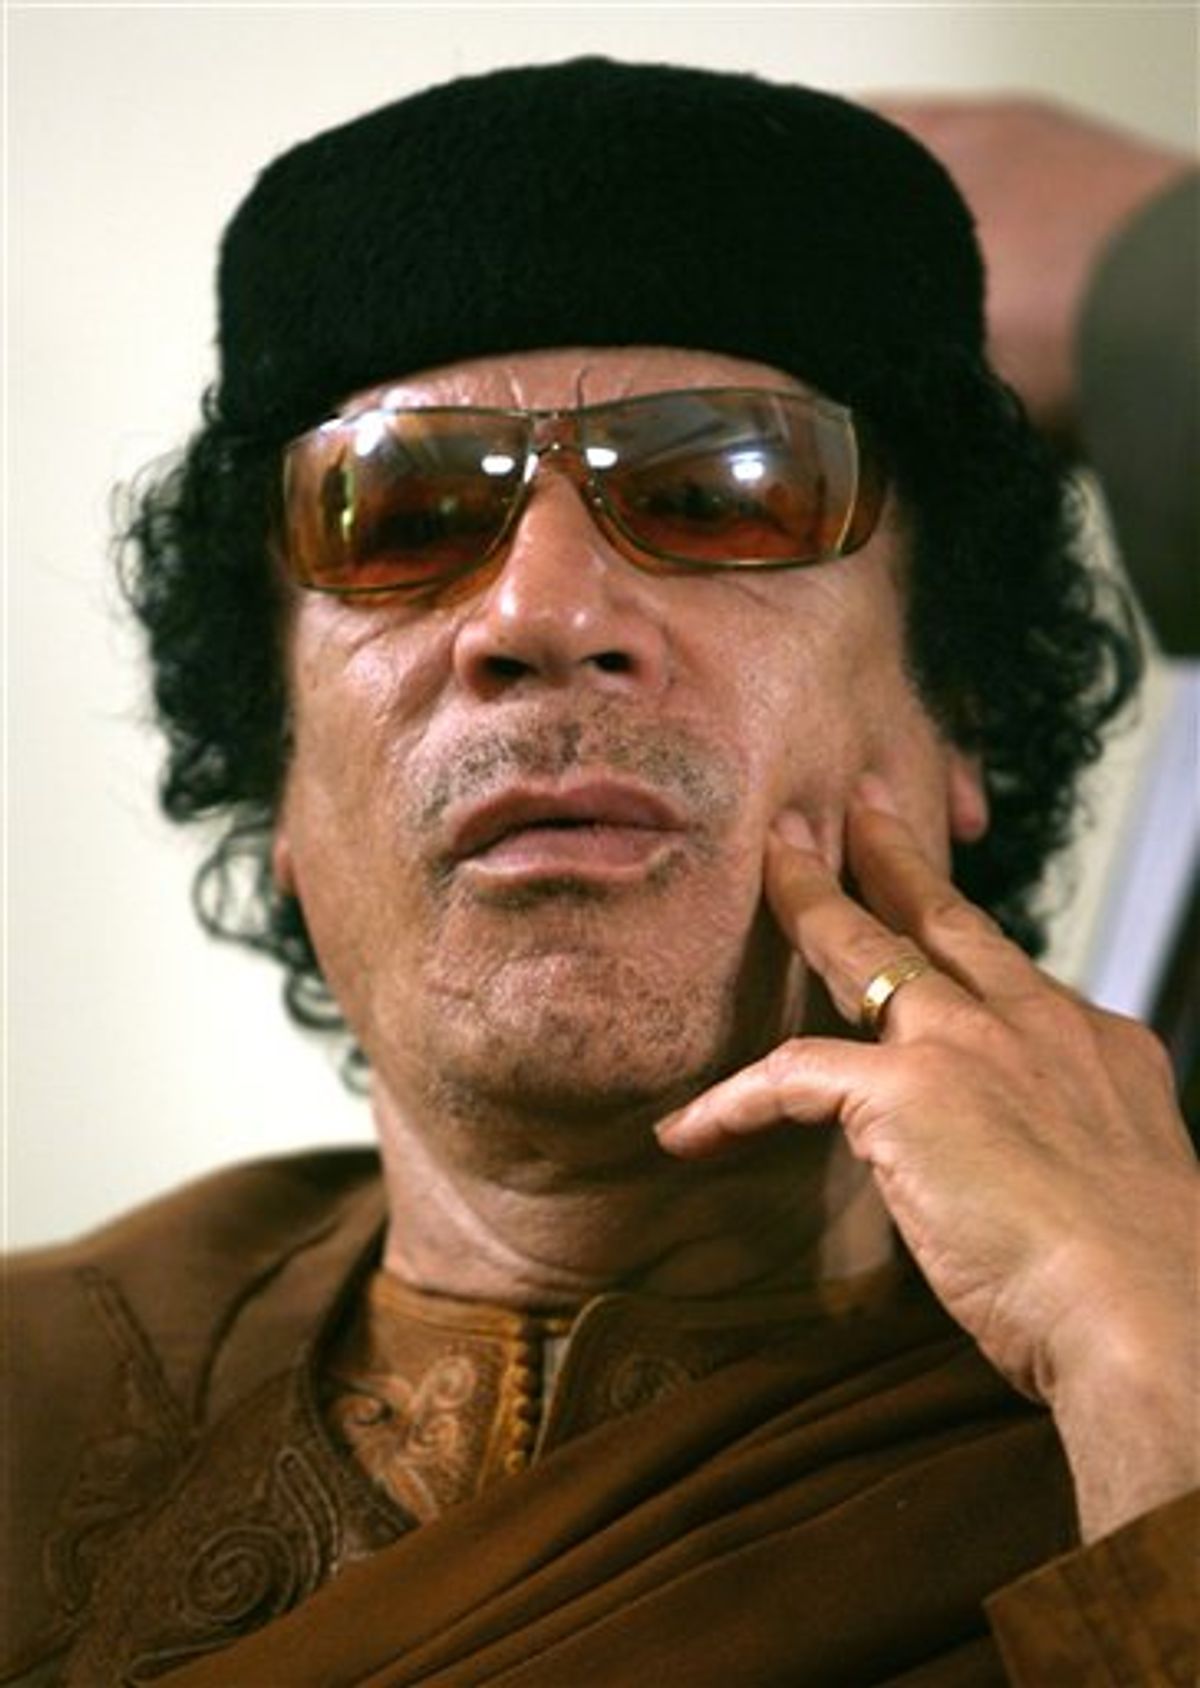 FILE.- This Friday, March 2, 2007 file photo shows Libya's Moammar Gadhafi  in Sabha, Libya Friday, March 2, 2007. The International Criminal Court issued arrest warrants Monday June 27, 2011, for Libyan leader Moammar Gadhafi, his son and his intelligence chief for crimes against humanity in the early days of their struggle to cling to power. (AP Photo/Nasser Nasser, File) (AP)